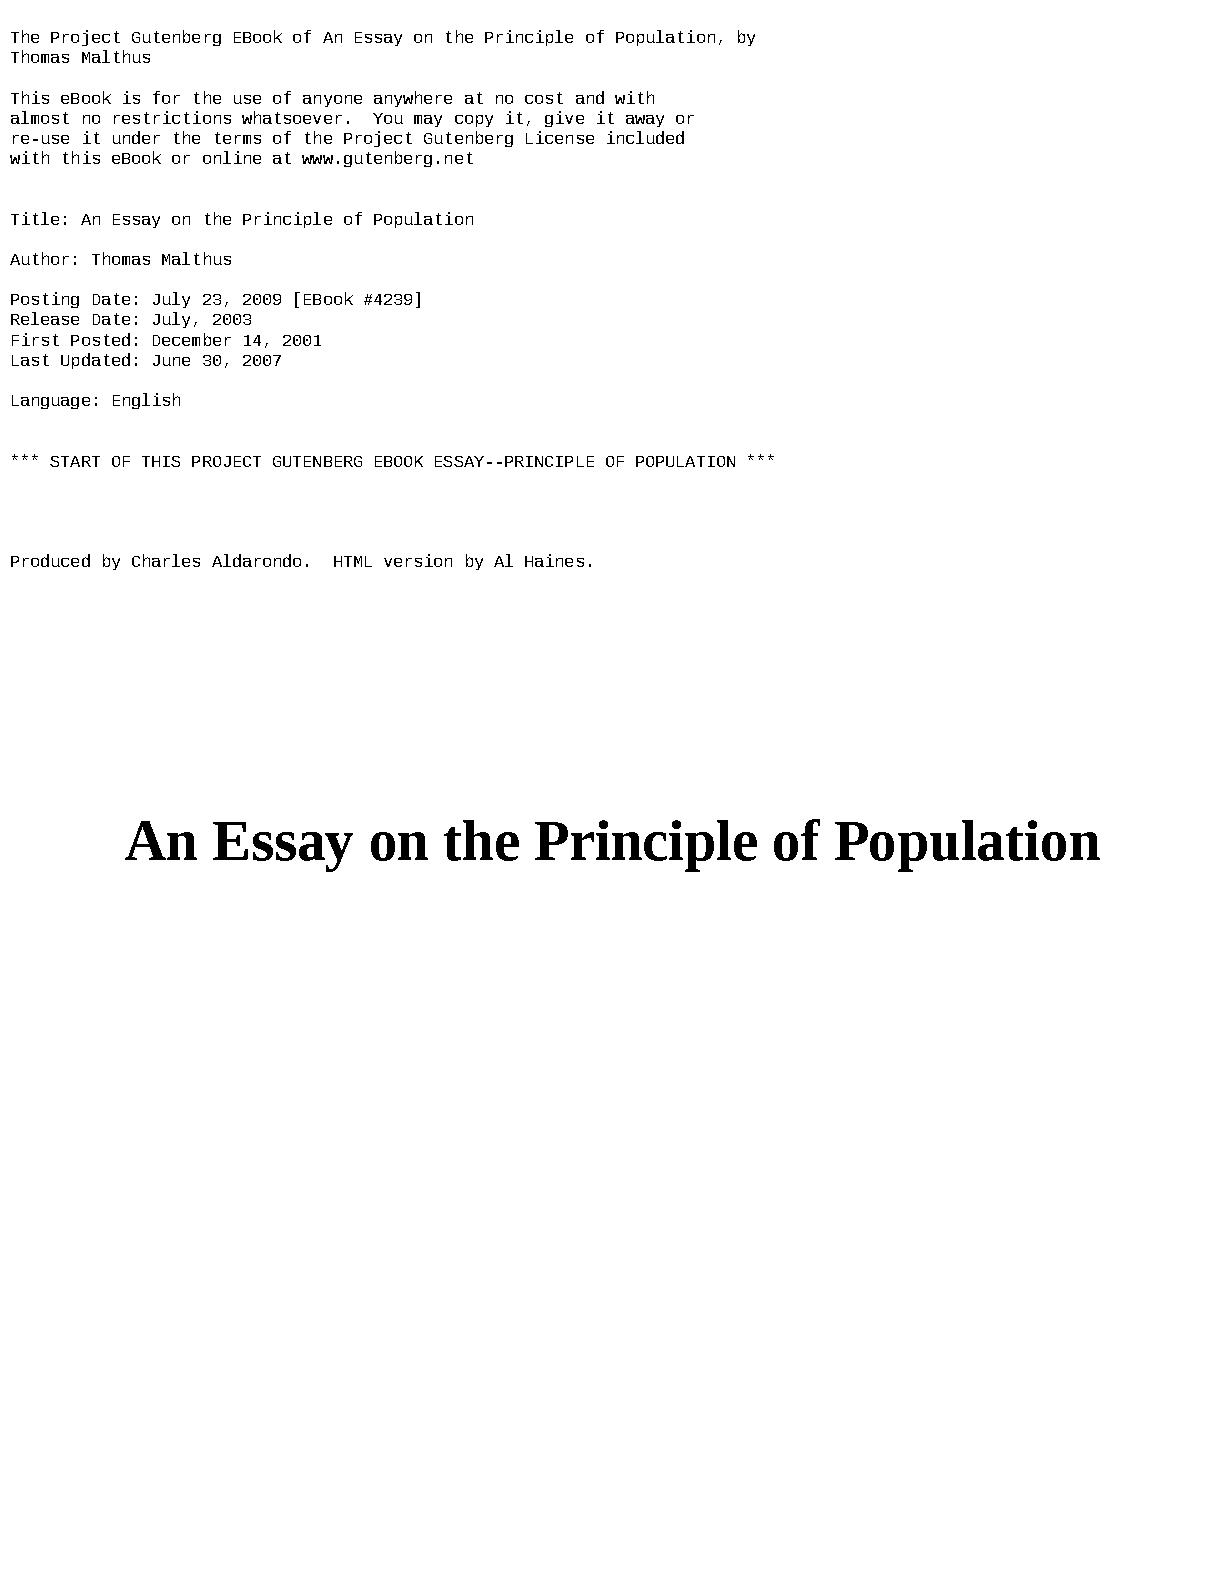 an essay on the principle of population maintained that